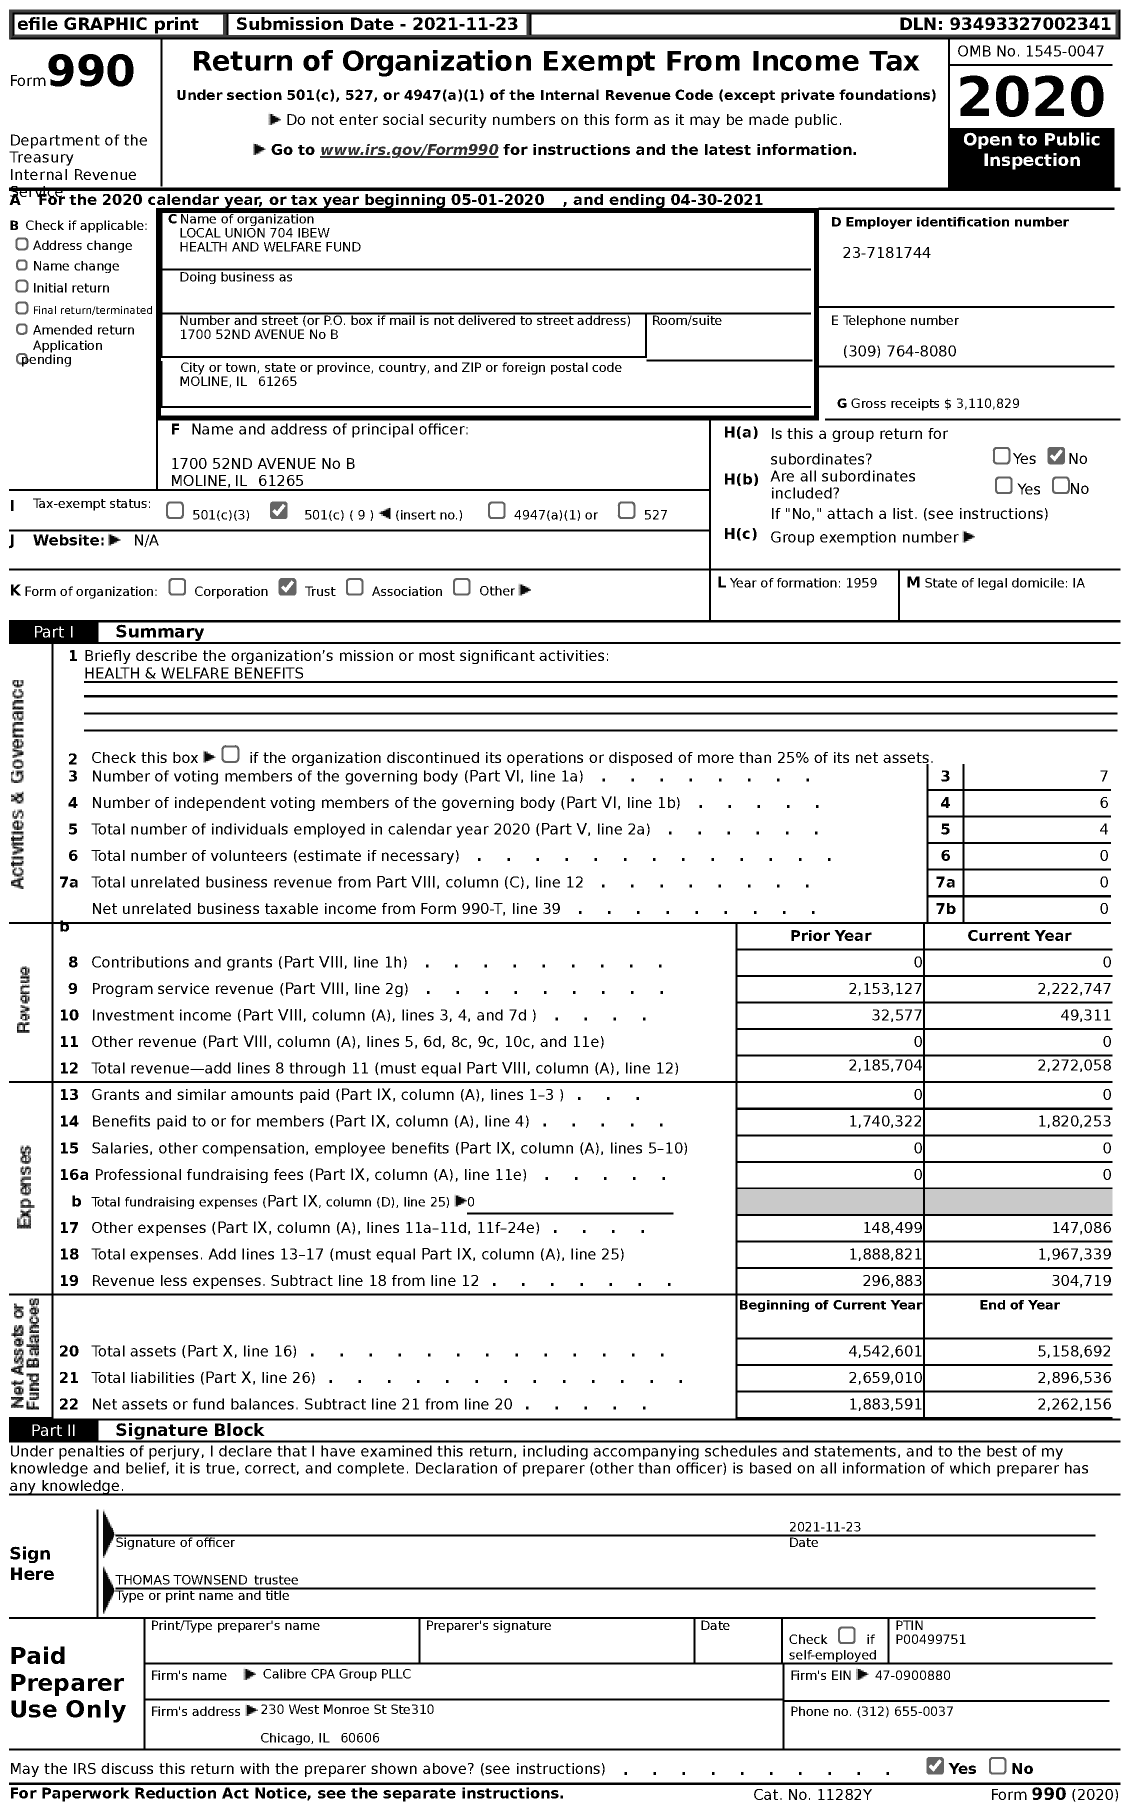 Image of first page of 2020 Form 990 for Local Union 704 IBEW Health and Welfare Fund